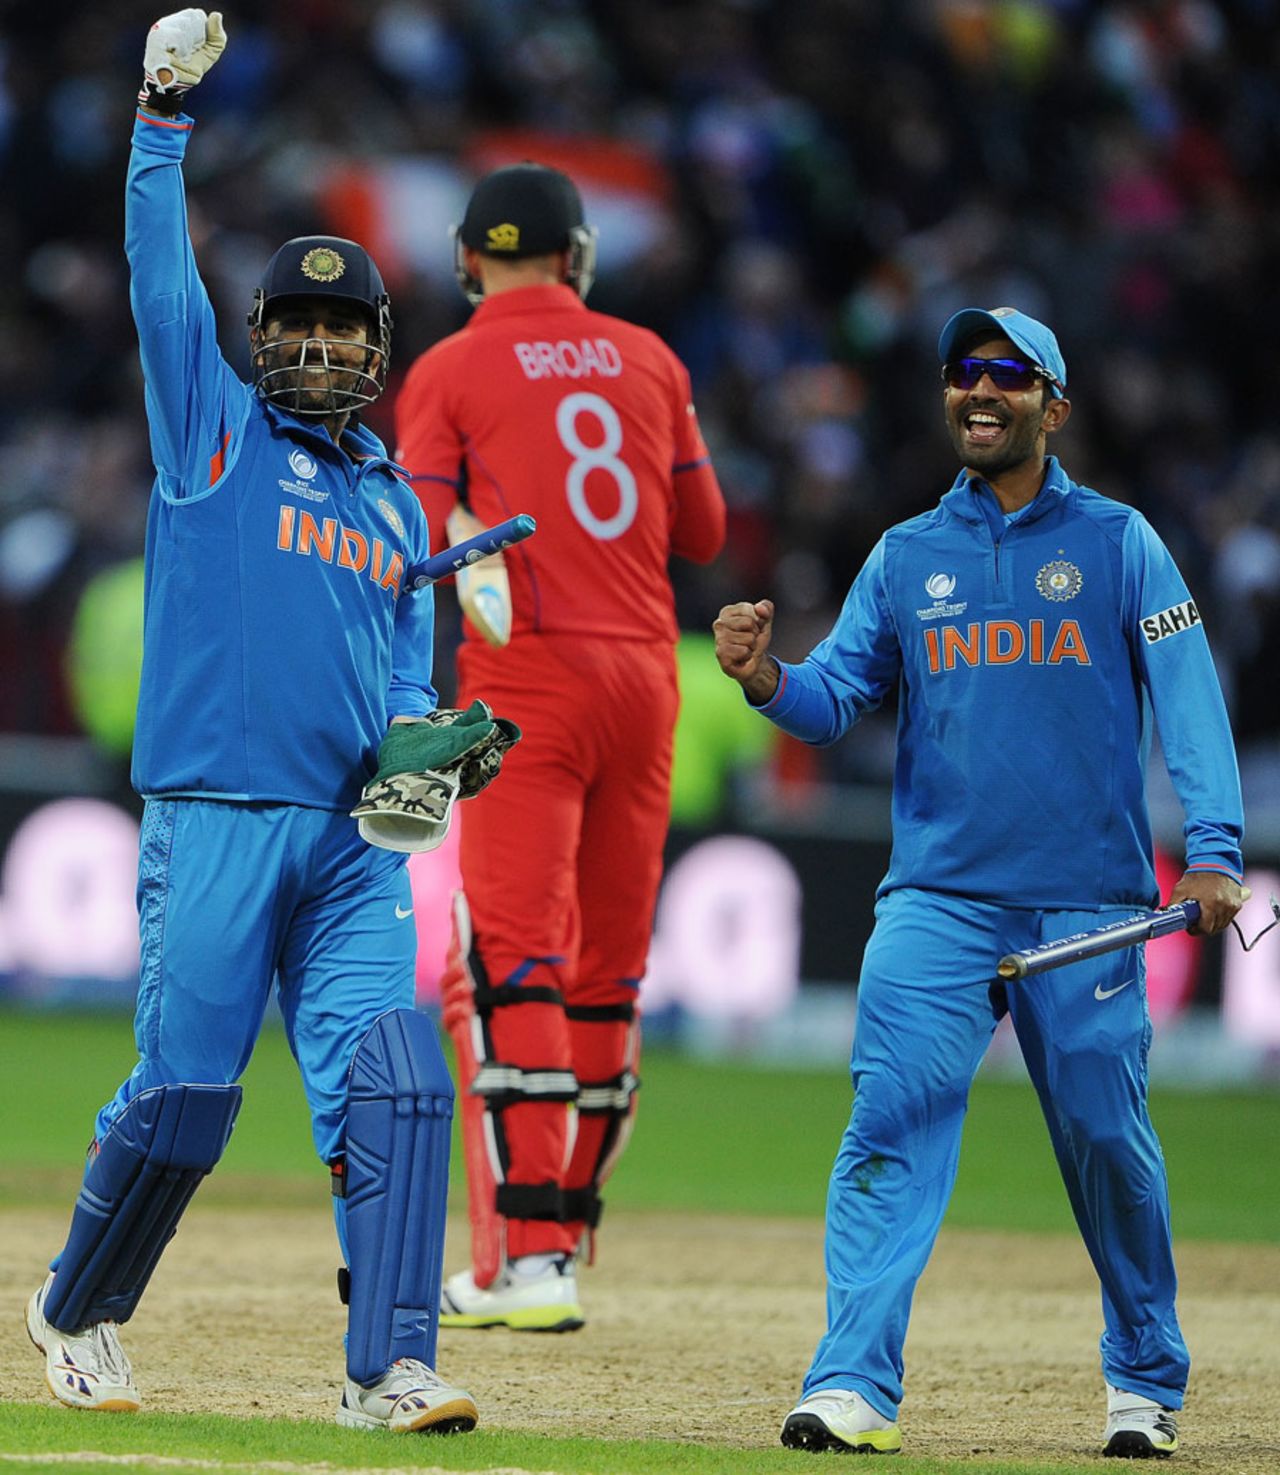 MS Dhoni signals to the pavilion while Dinesh Karthik looks on, England v India, Champions Trophy final, Edgbaston, June 23, 2013